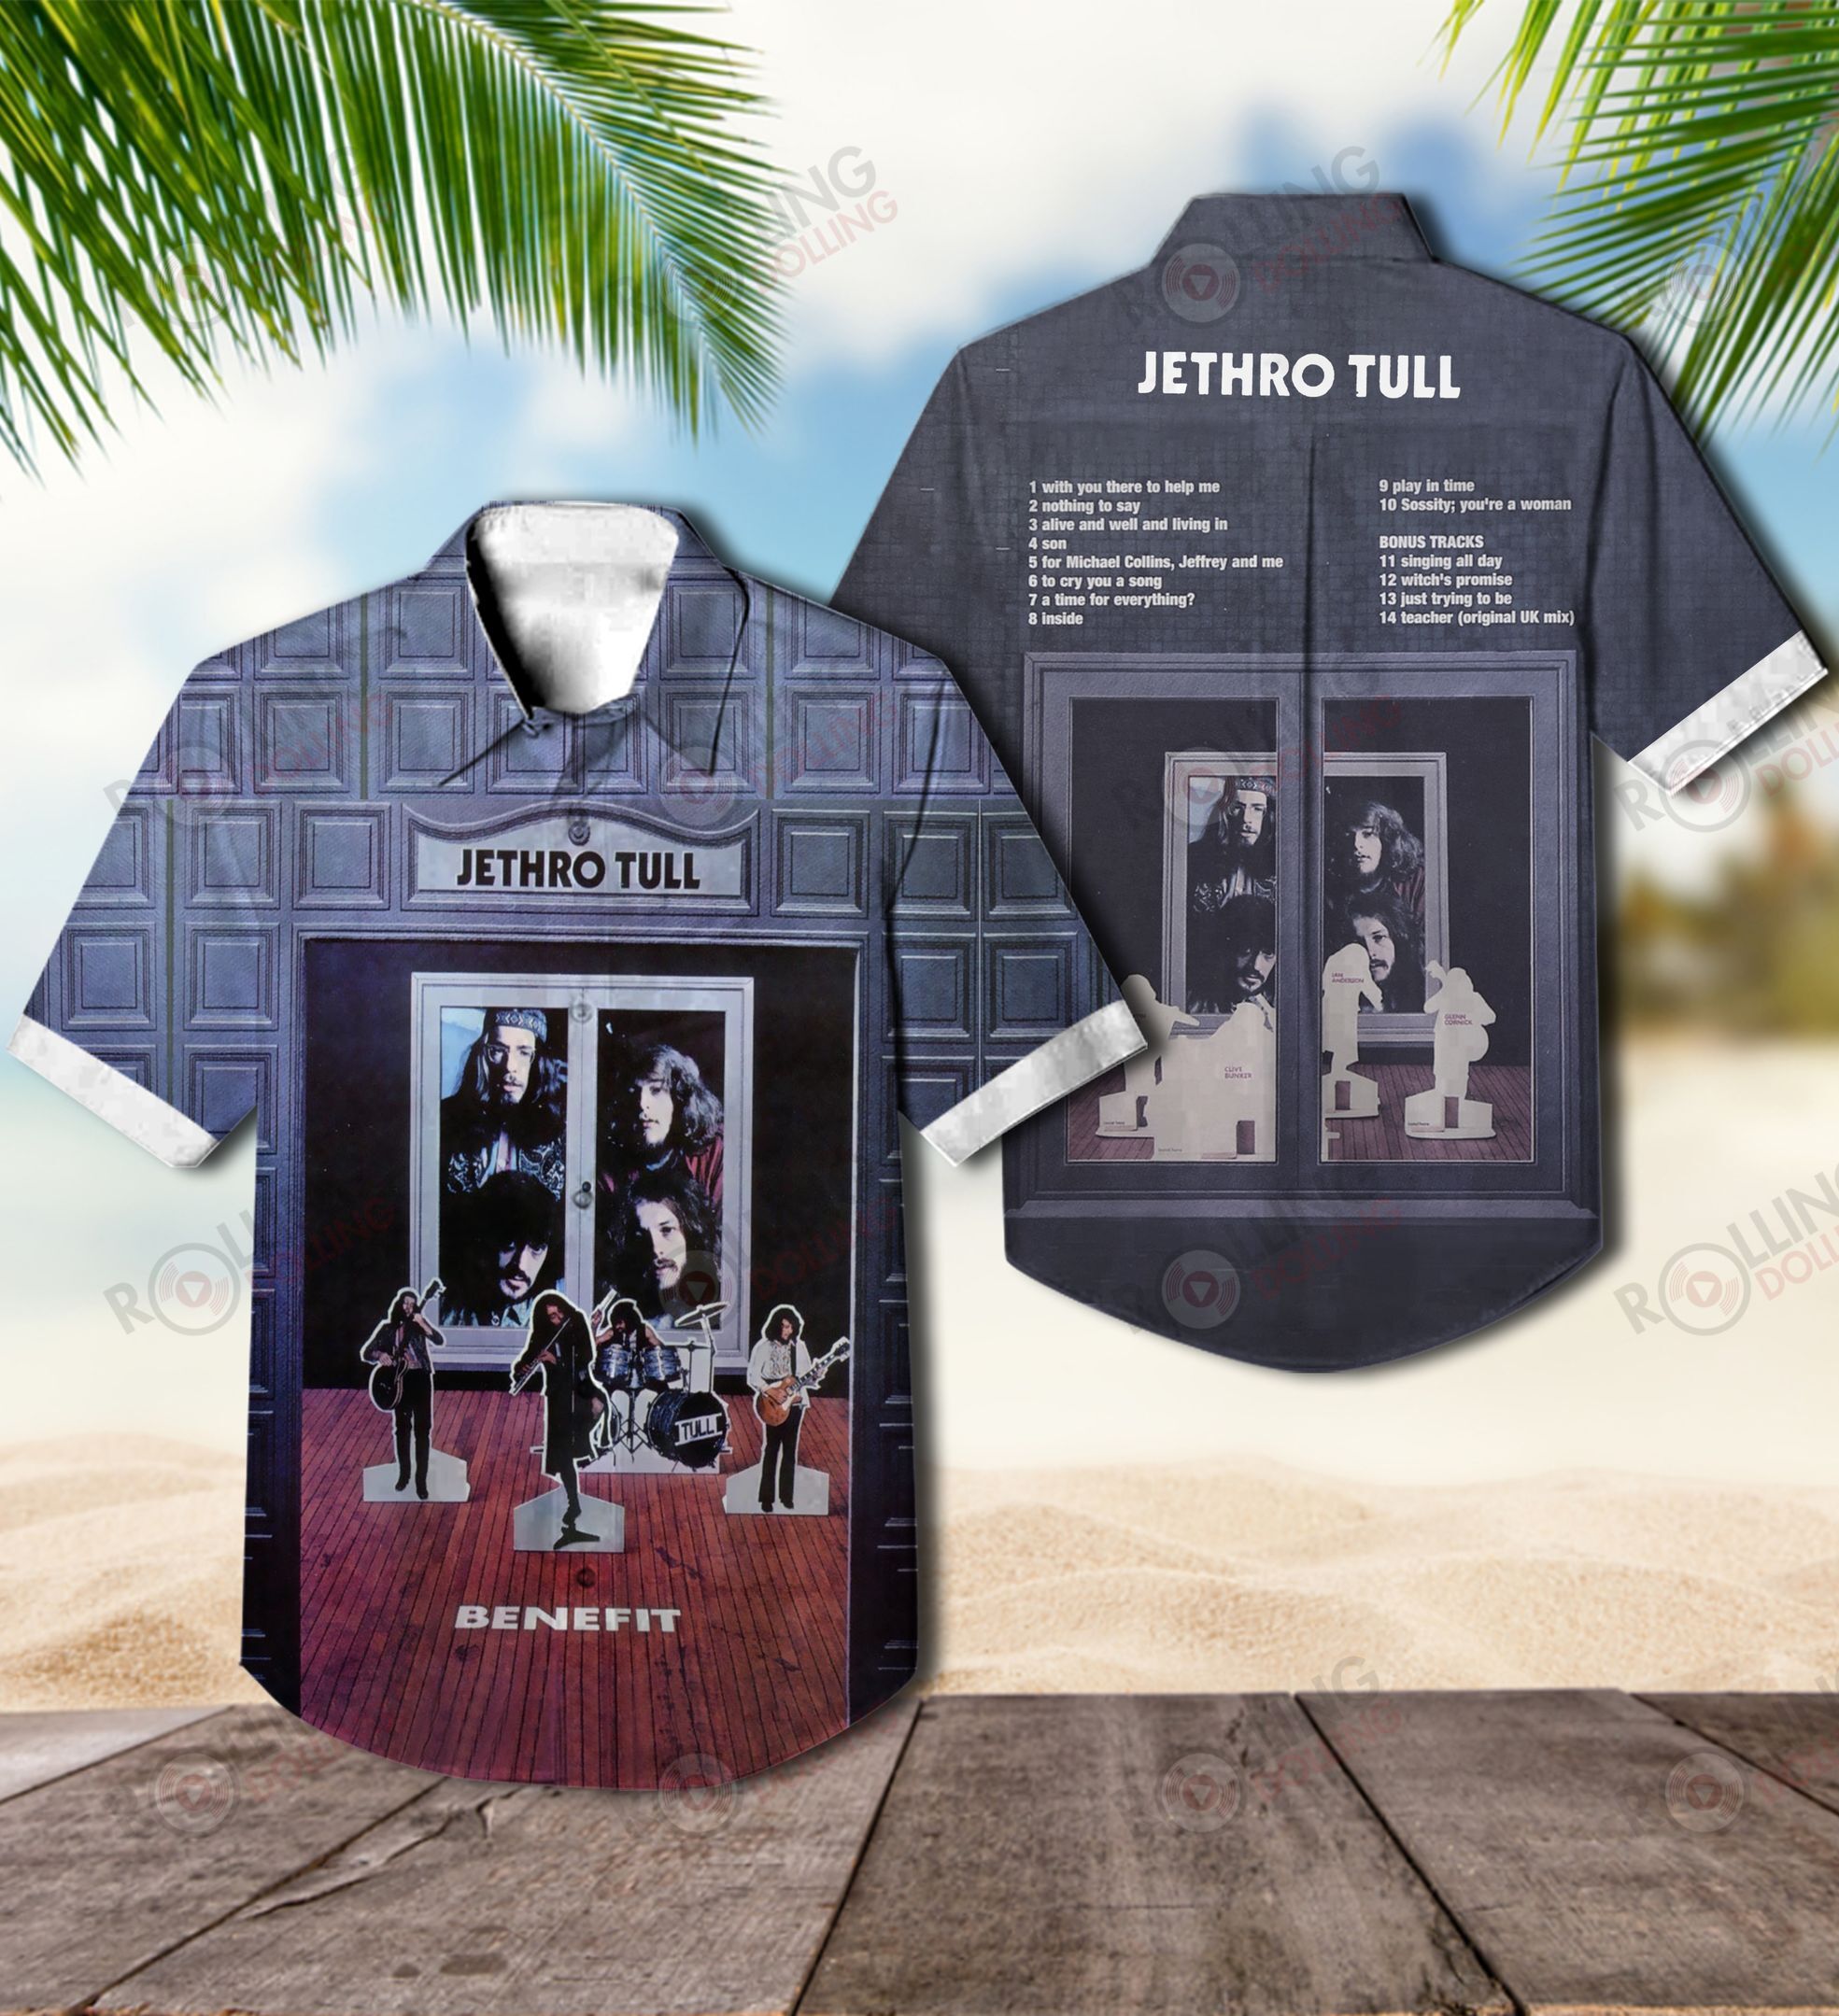 This would make a great gift for any fan who loves Hawaiian Shirt as well as Rock band 65